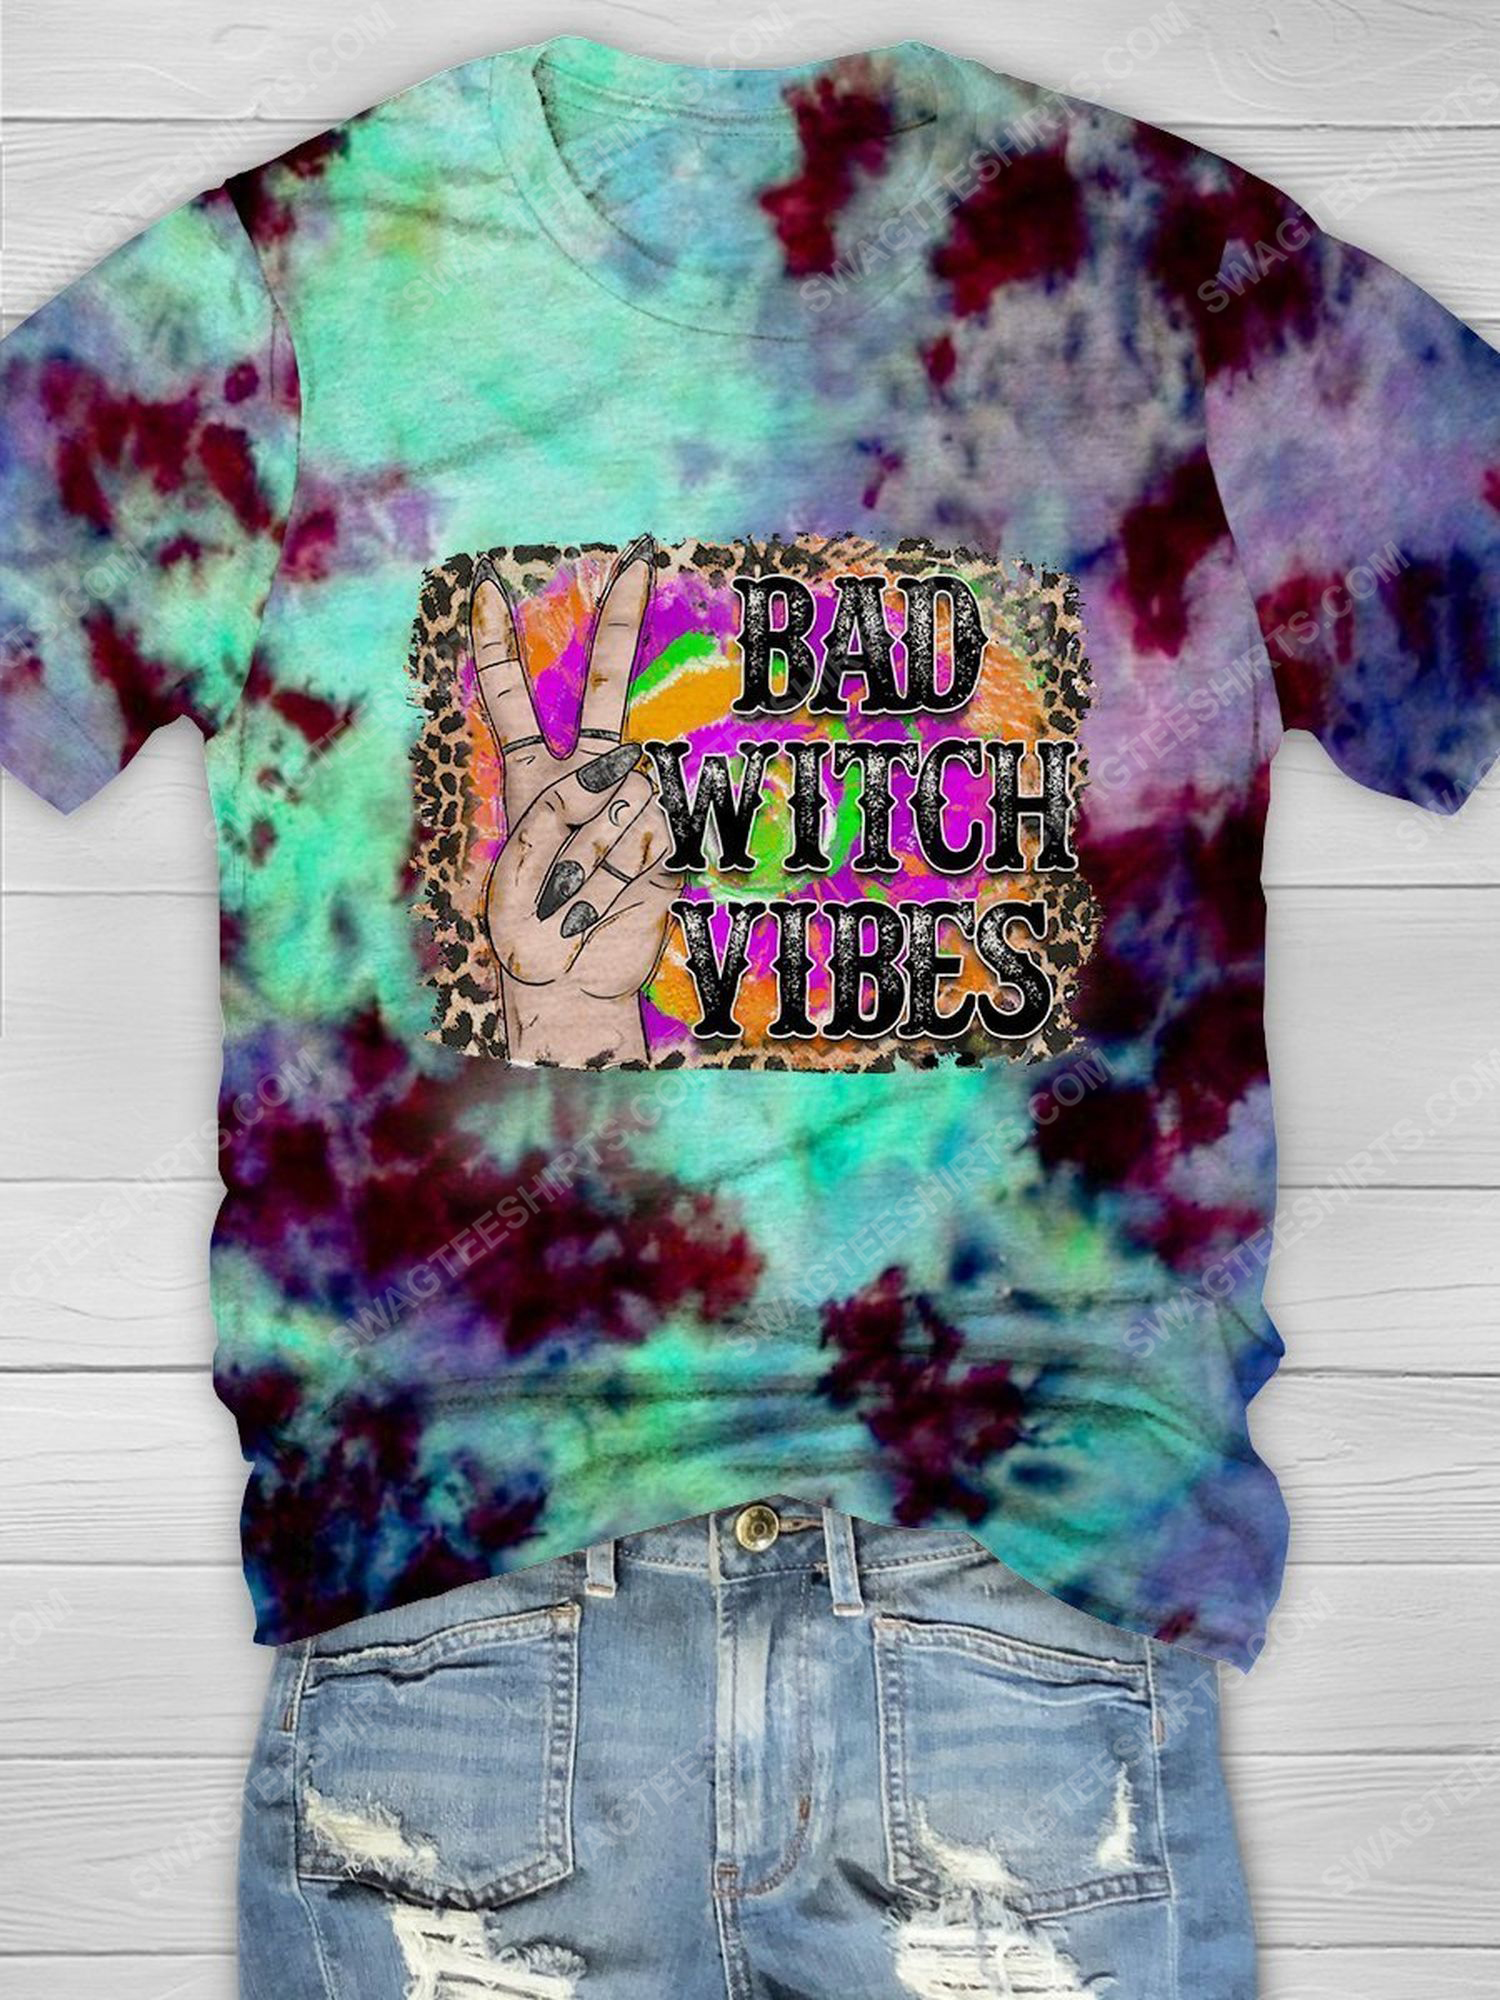 Halloween bad witch vibes tie dye shirt 1 - Copy